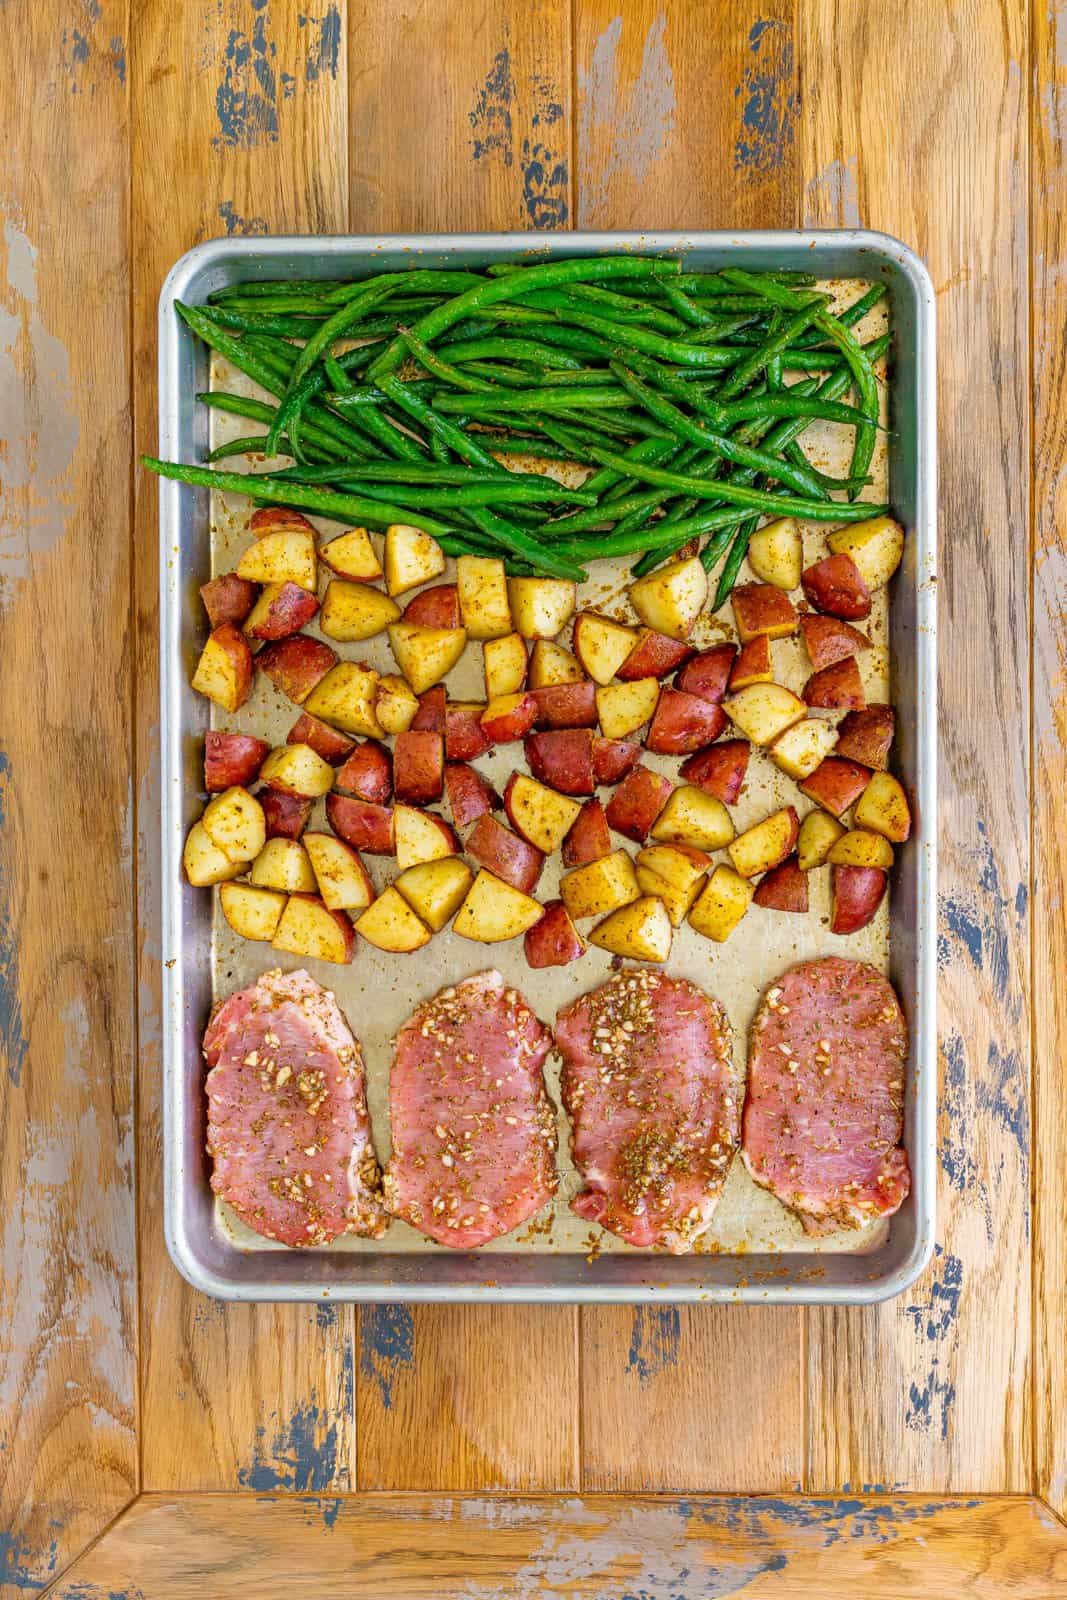 A sheet pan with seasoned pork chops and green beans and potatoes.